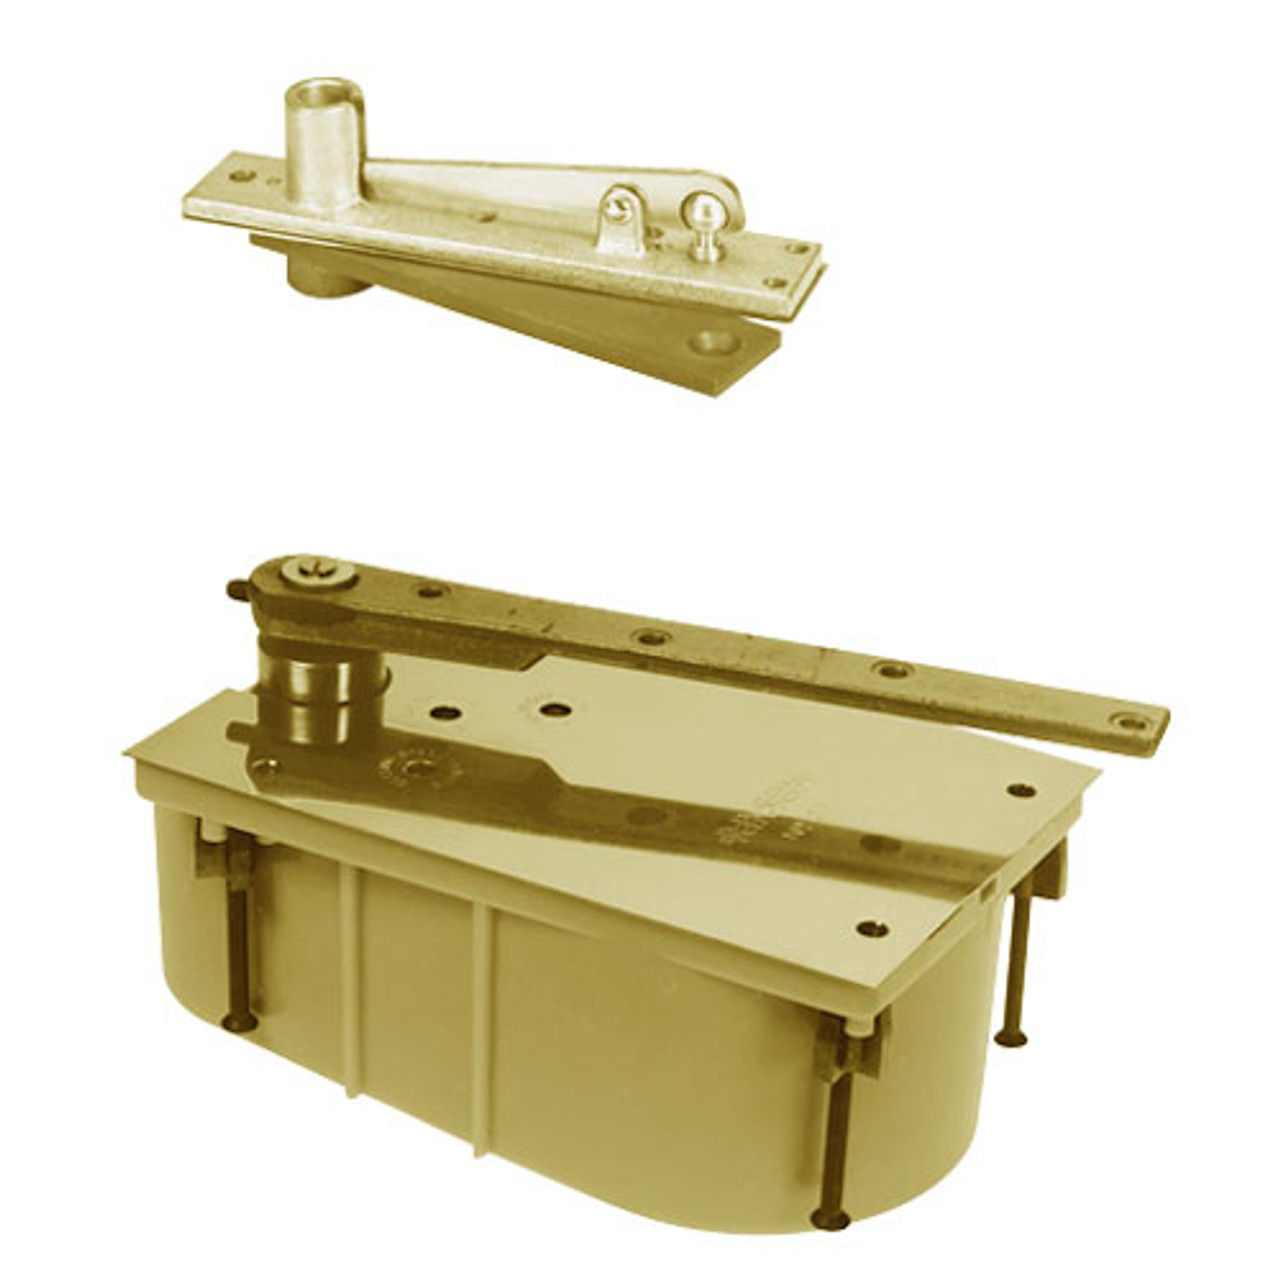 28-85N-554-RH-606 Rixson 28 Series Heavy Duty Single Acting Center Hung Floor Closer with Concealed Arm in Satin Brass Finish